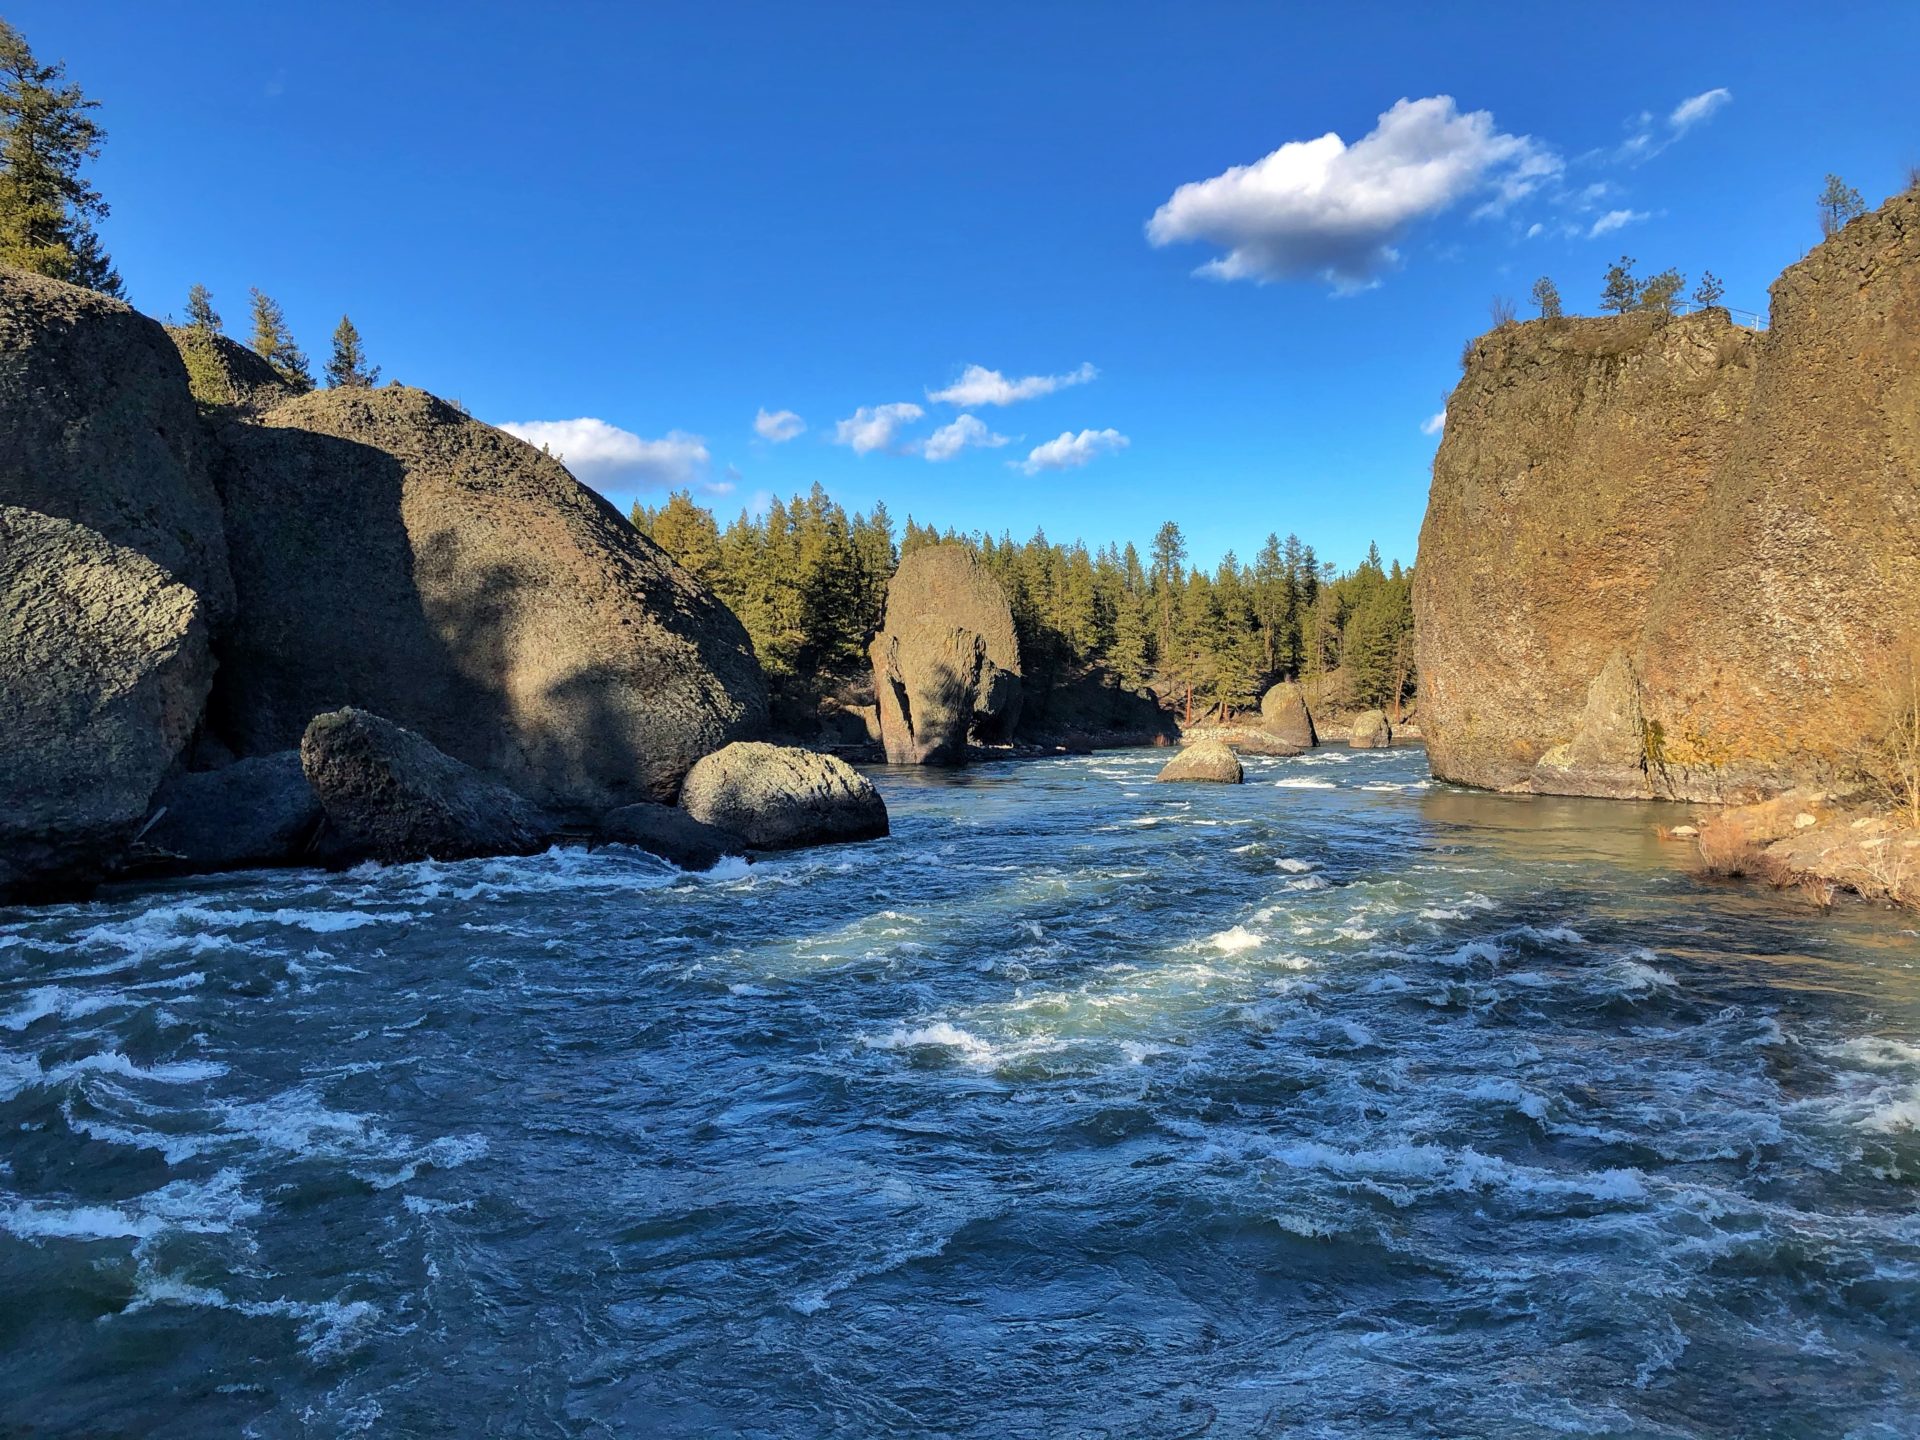 Spokane River. Rocks and trees and flowing river.